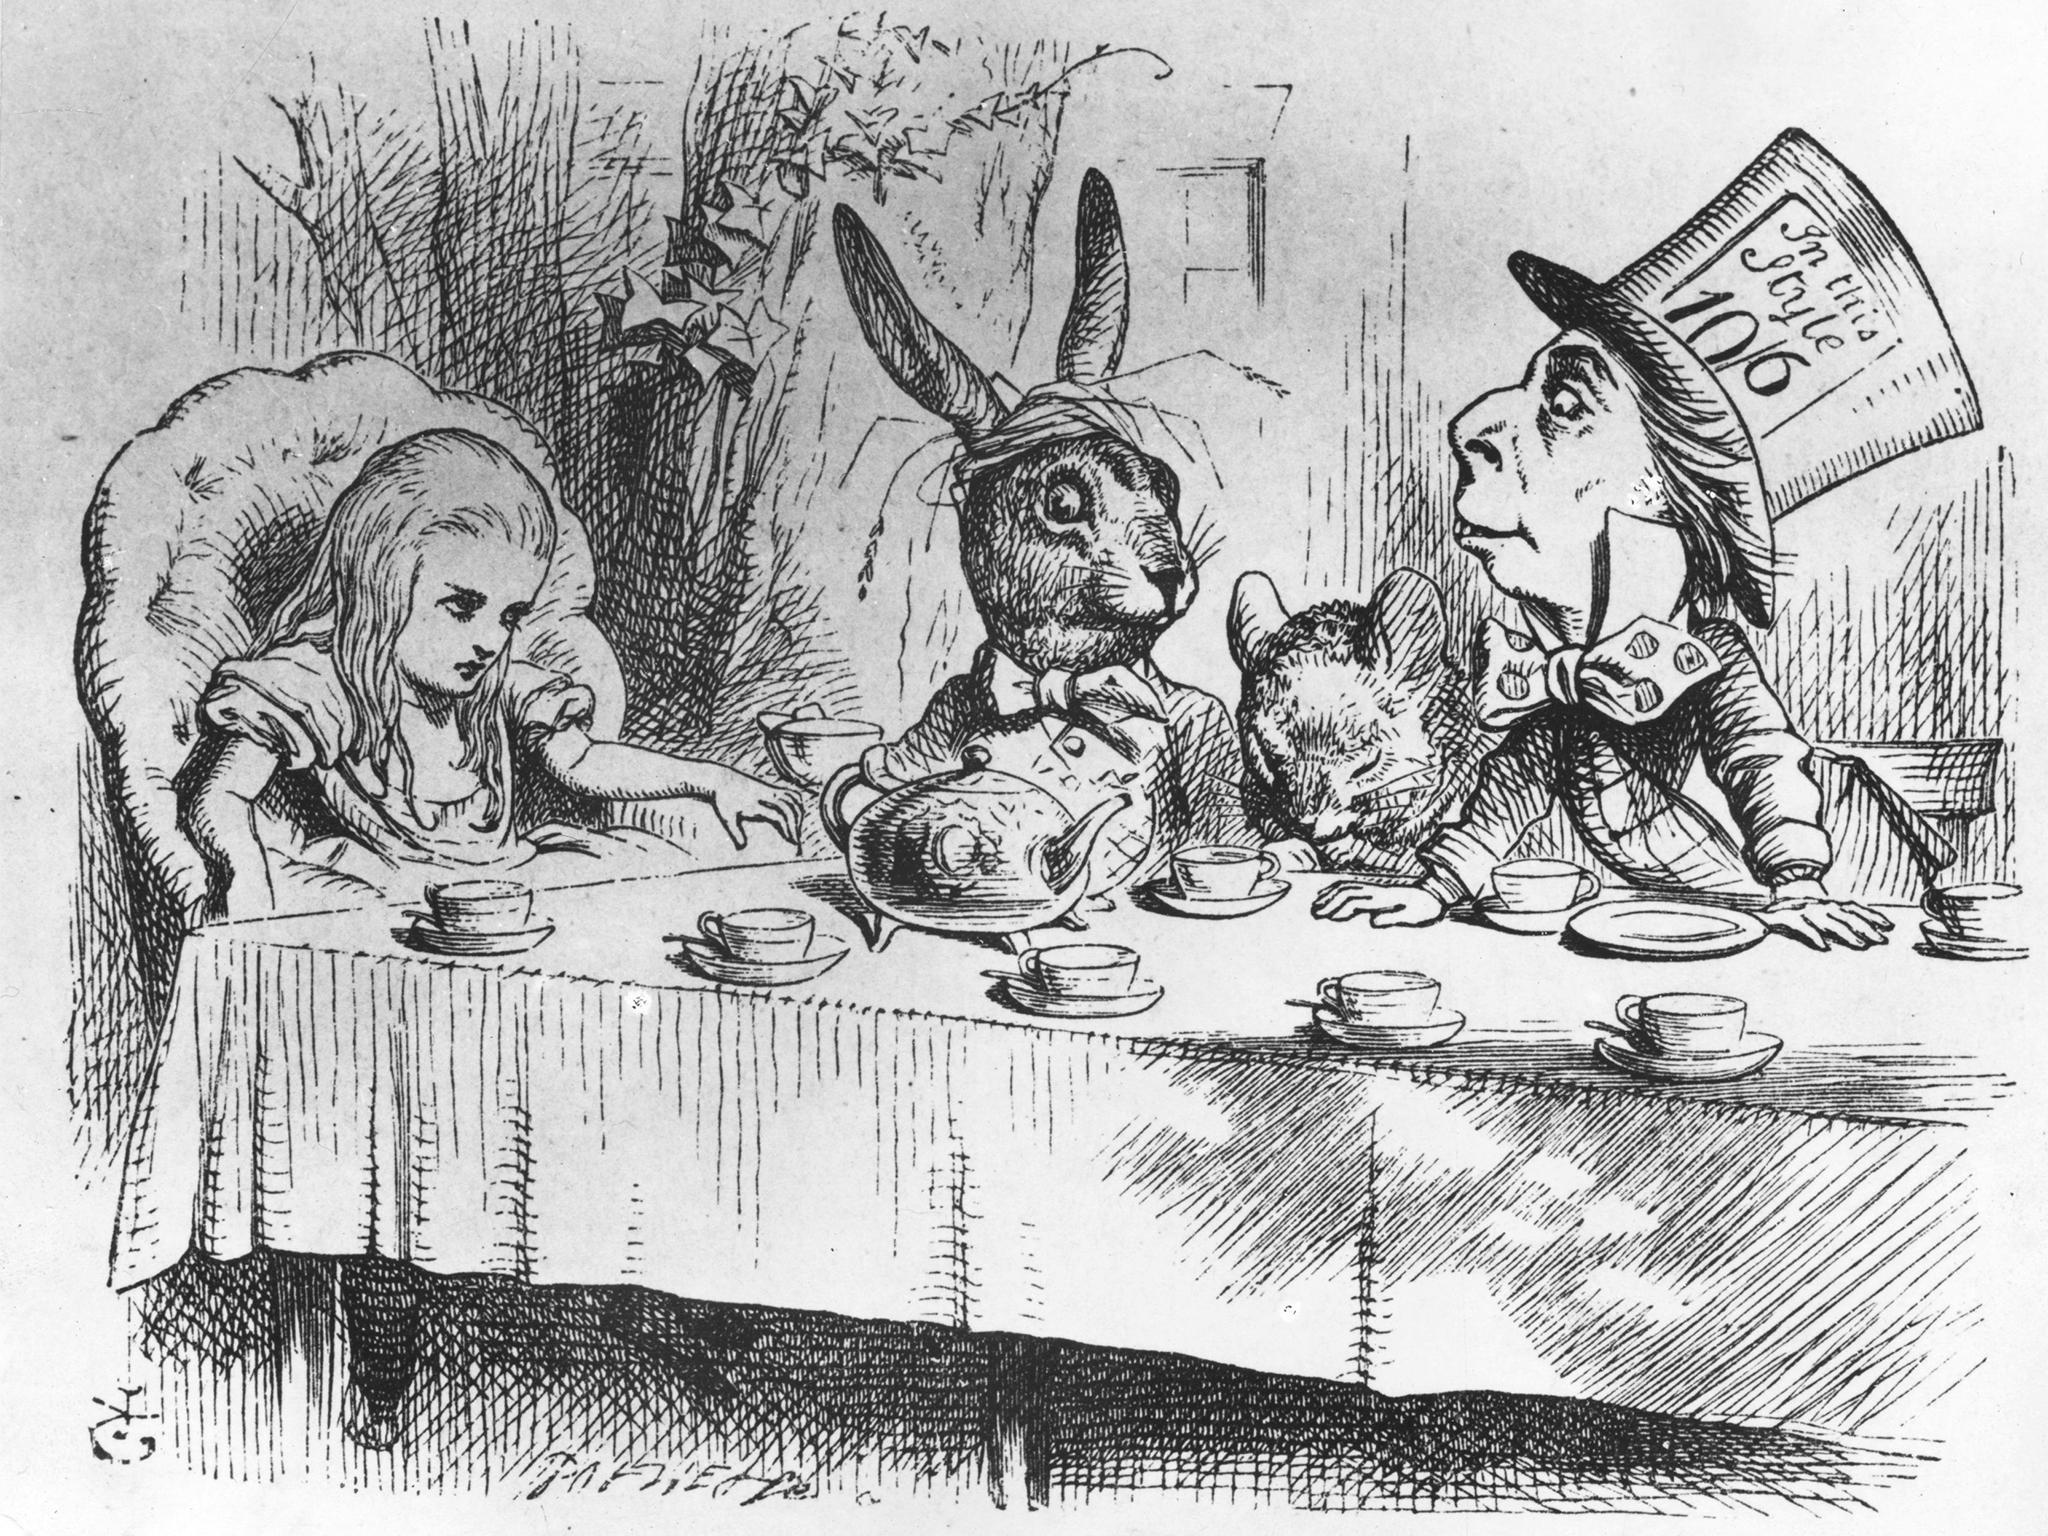 ‘Alice’s Adventures in Wonderland’ was one of the light reads in the mess